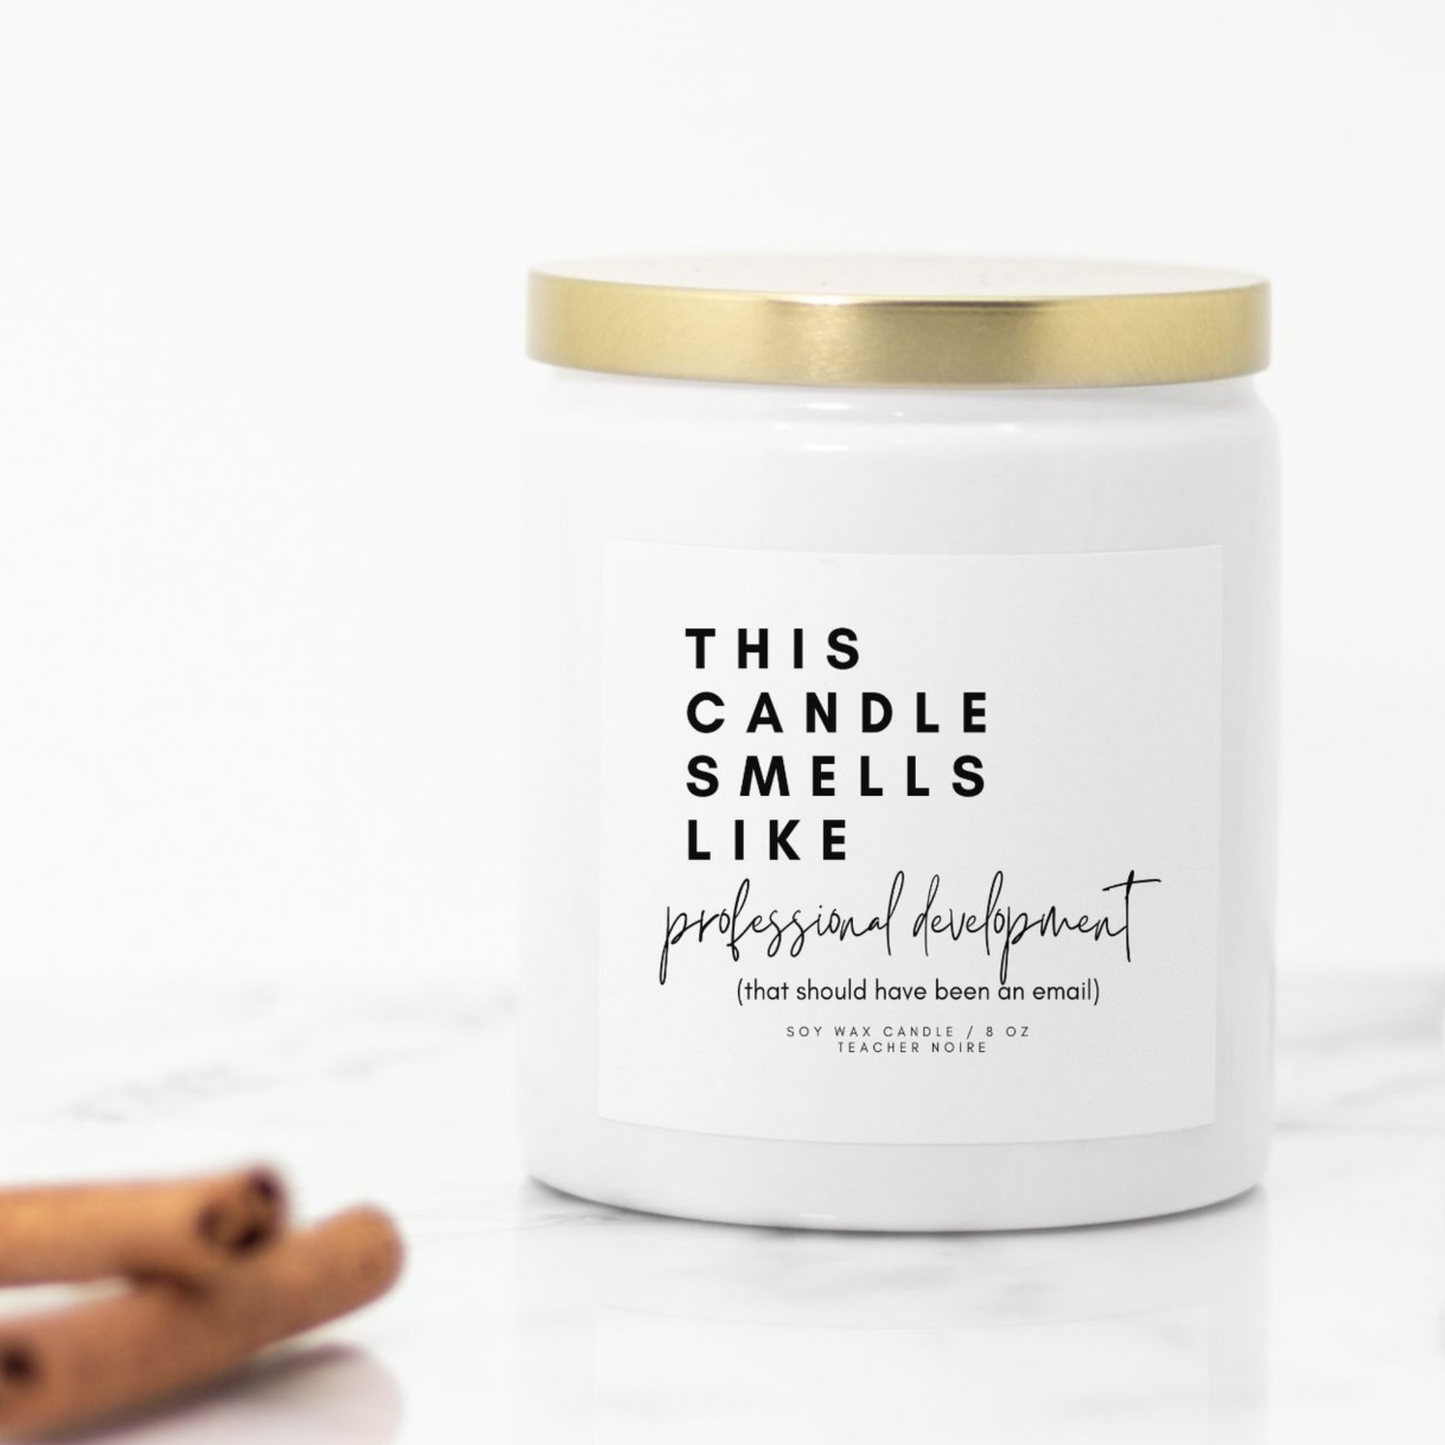 Professional Development ( This Should Have Been an Email) Candle